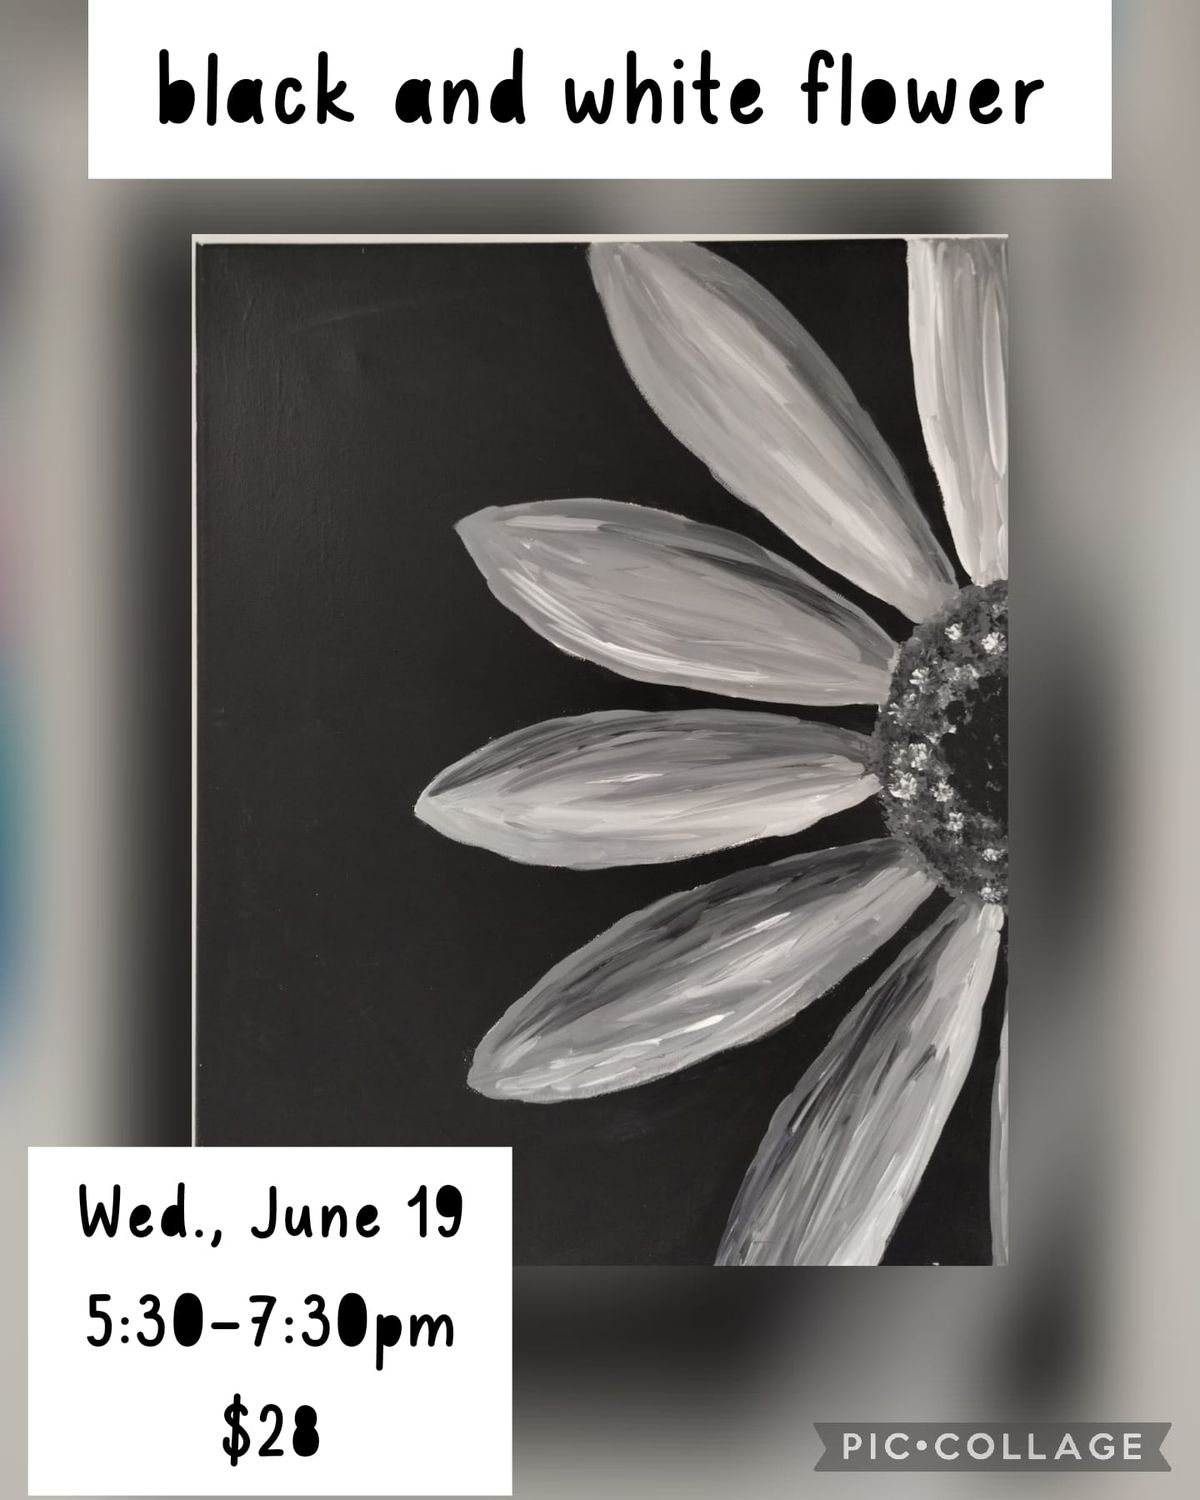 Black and white flower painting